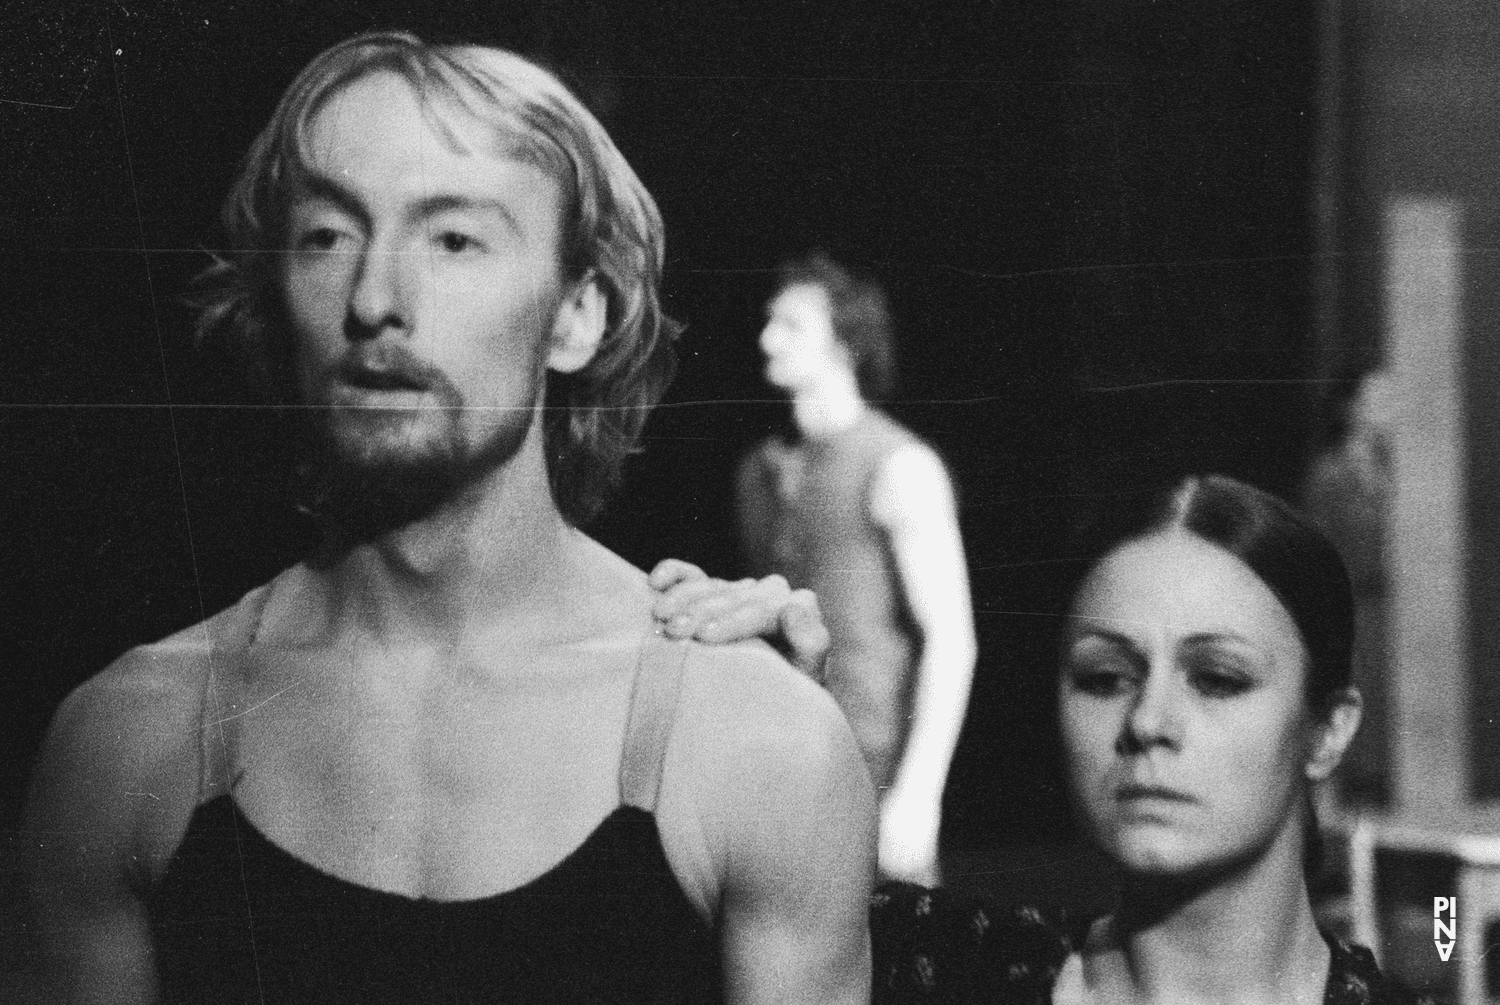 Dominique Mercy and Malou Airaudo in “Adagio – Five Songs by Gustav Mahler” by Pina Bausch